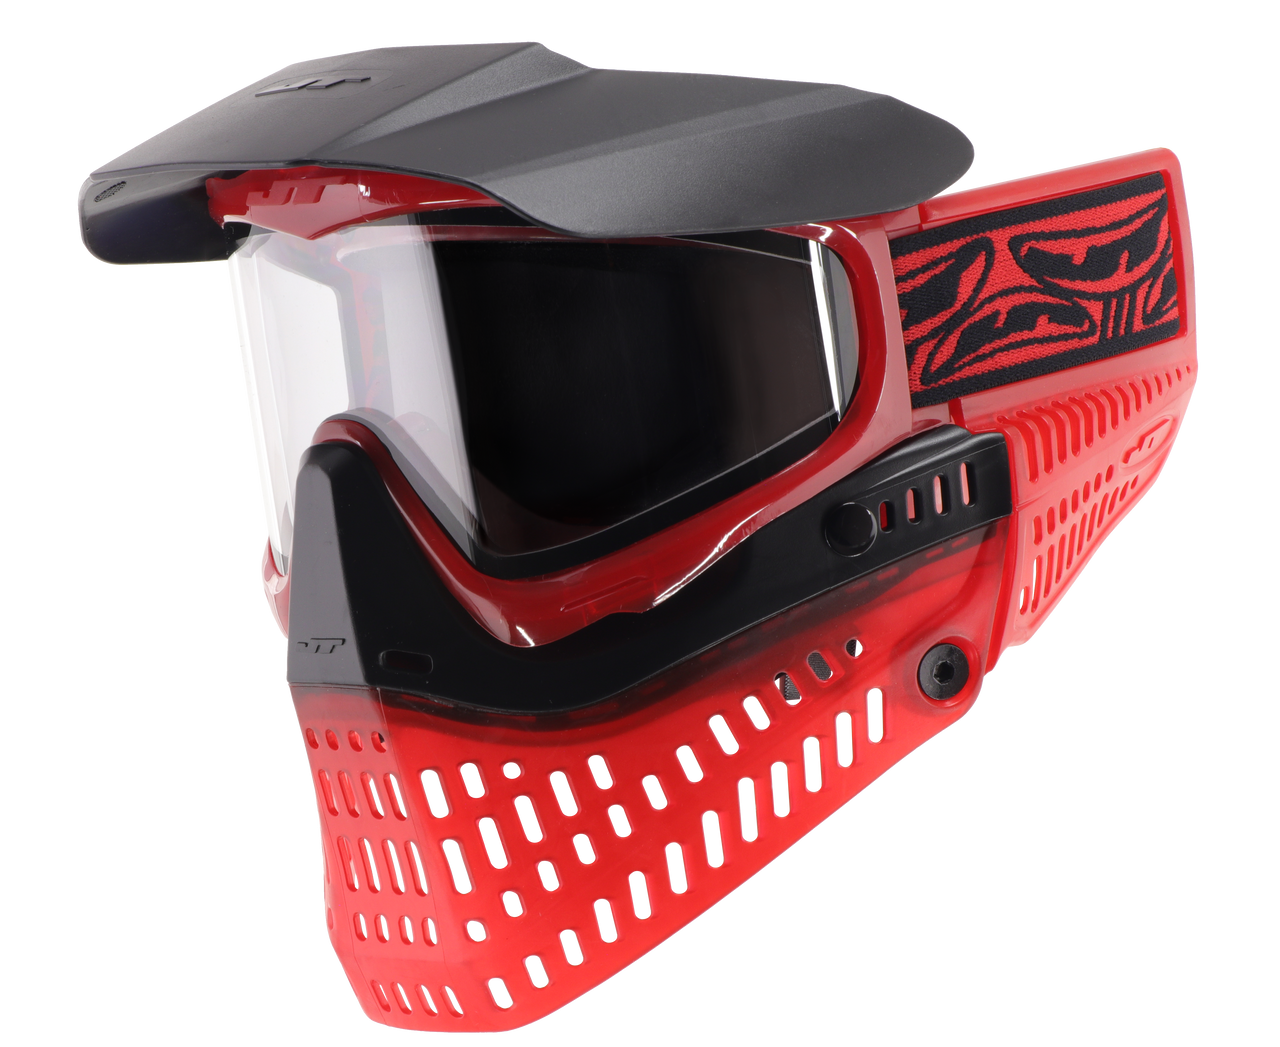 JT Proflex Mask - LE ICE Series - RED- Free Shipping!